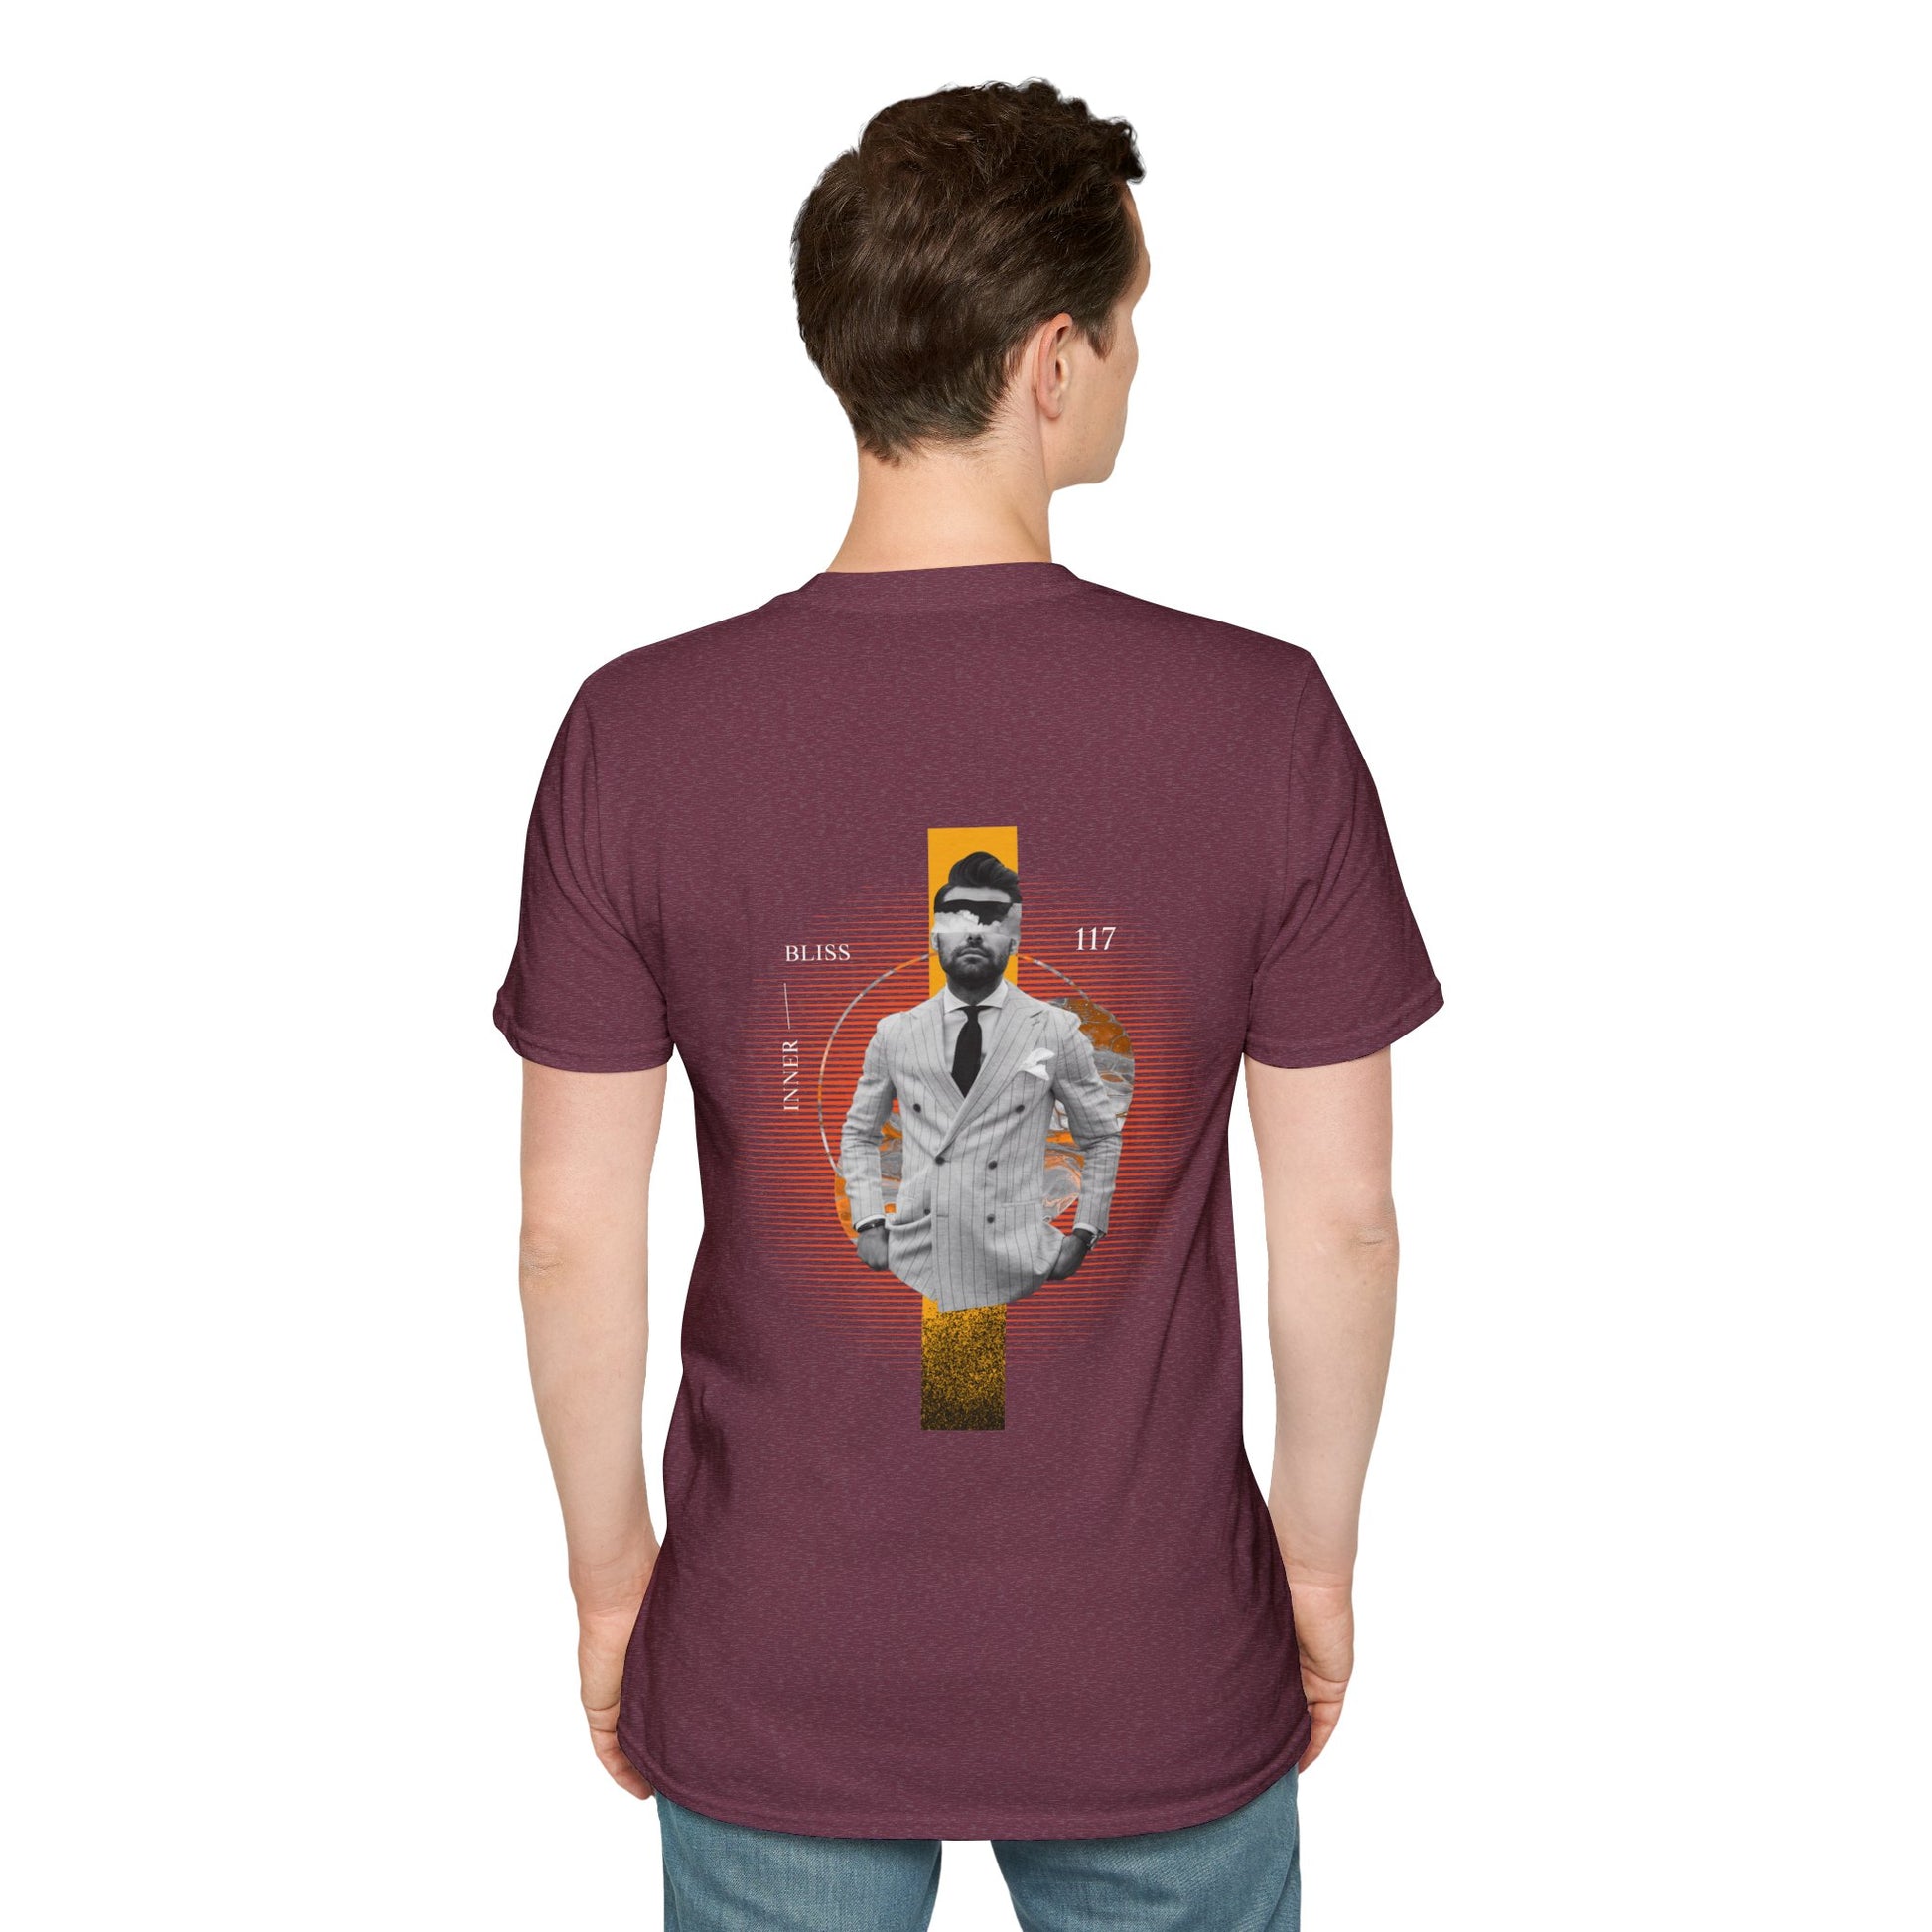 Cherry  T-shirt featuring a faceless man in a suit with a bold yellow rectangle